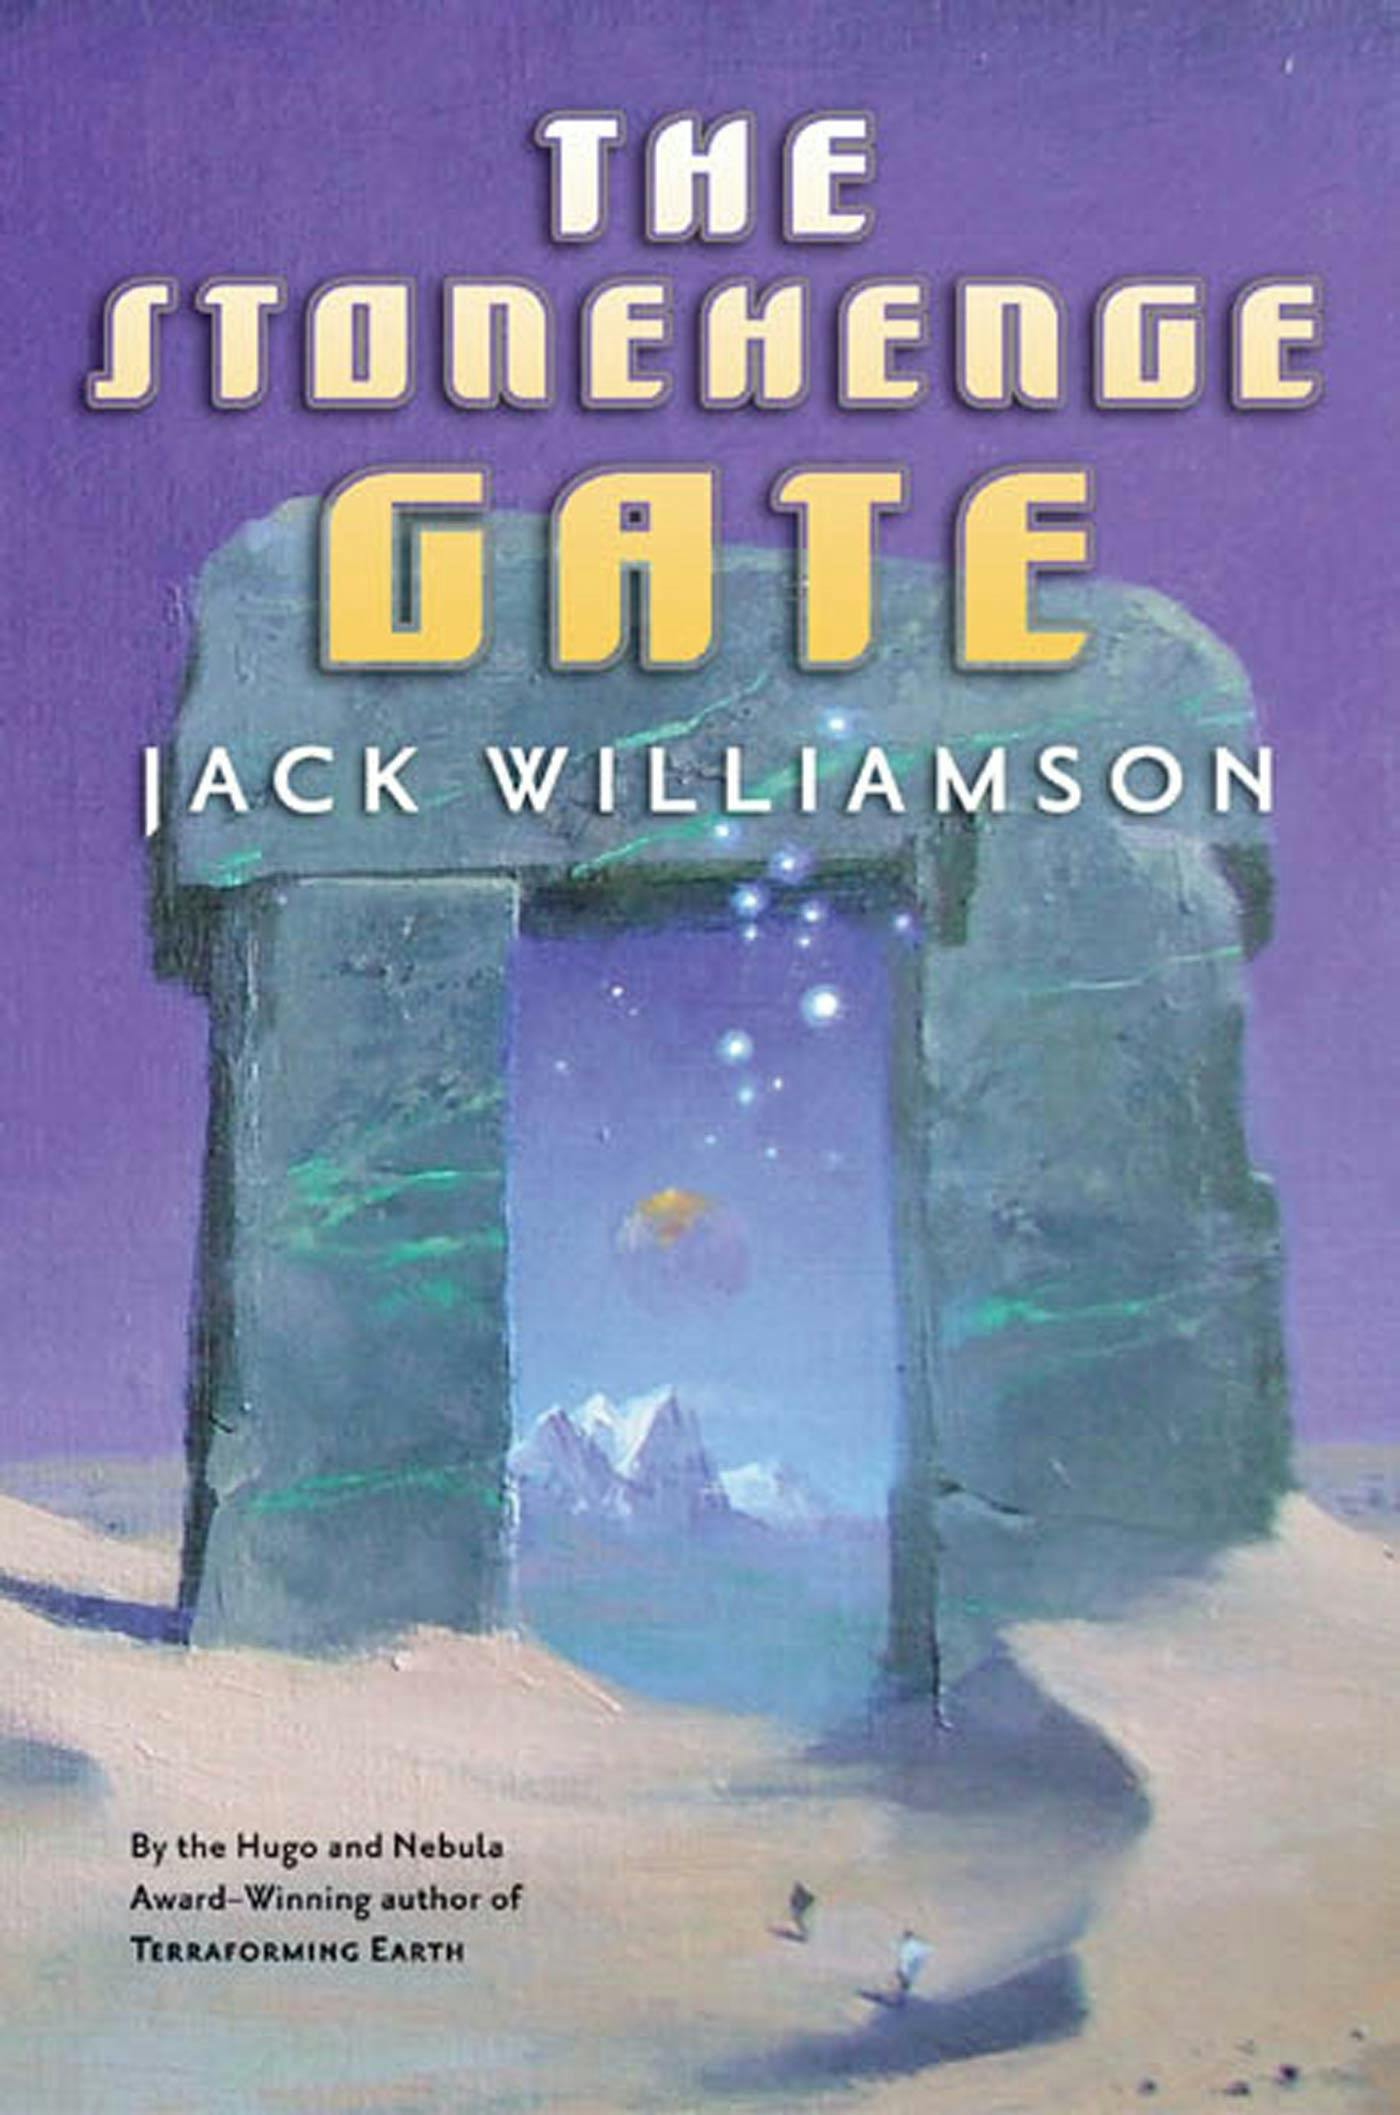 Cover for the book titled as: The Stonehenge Gate